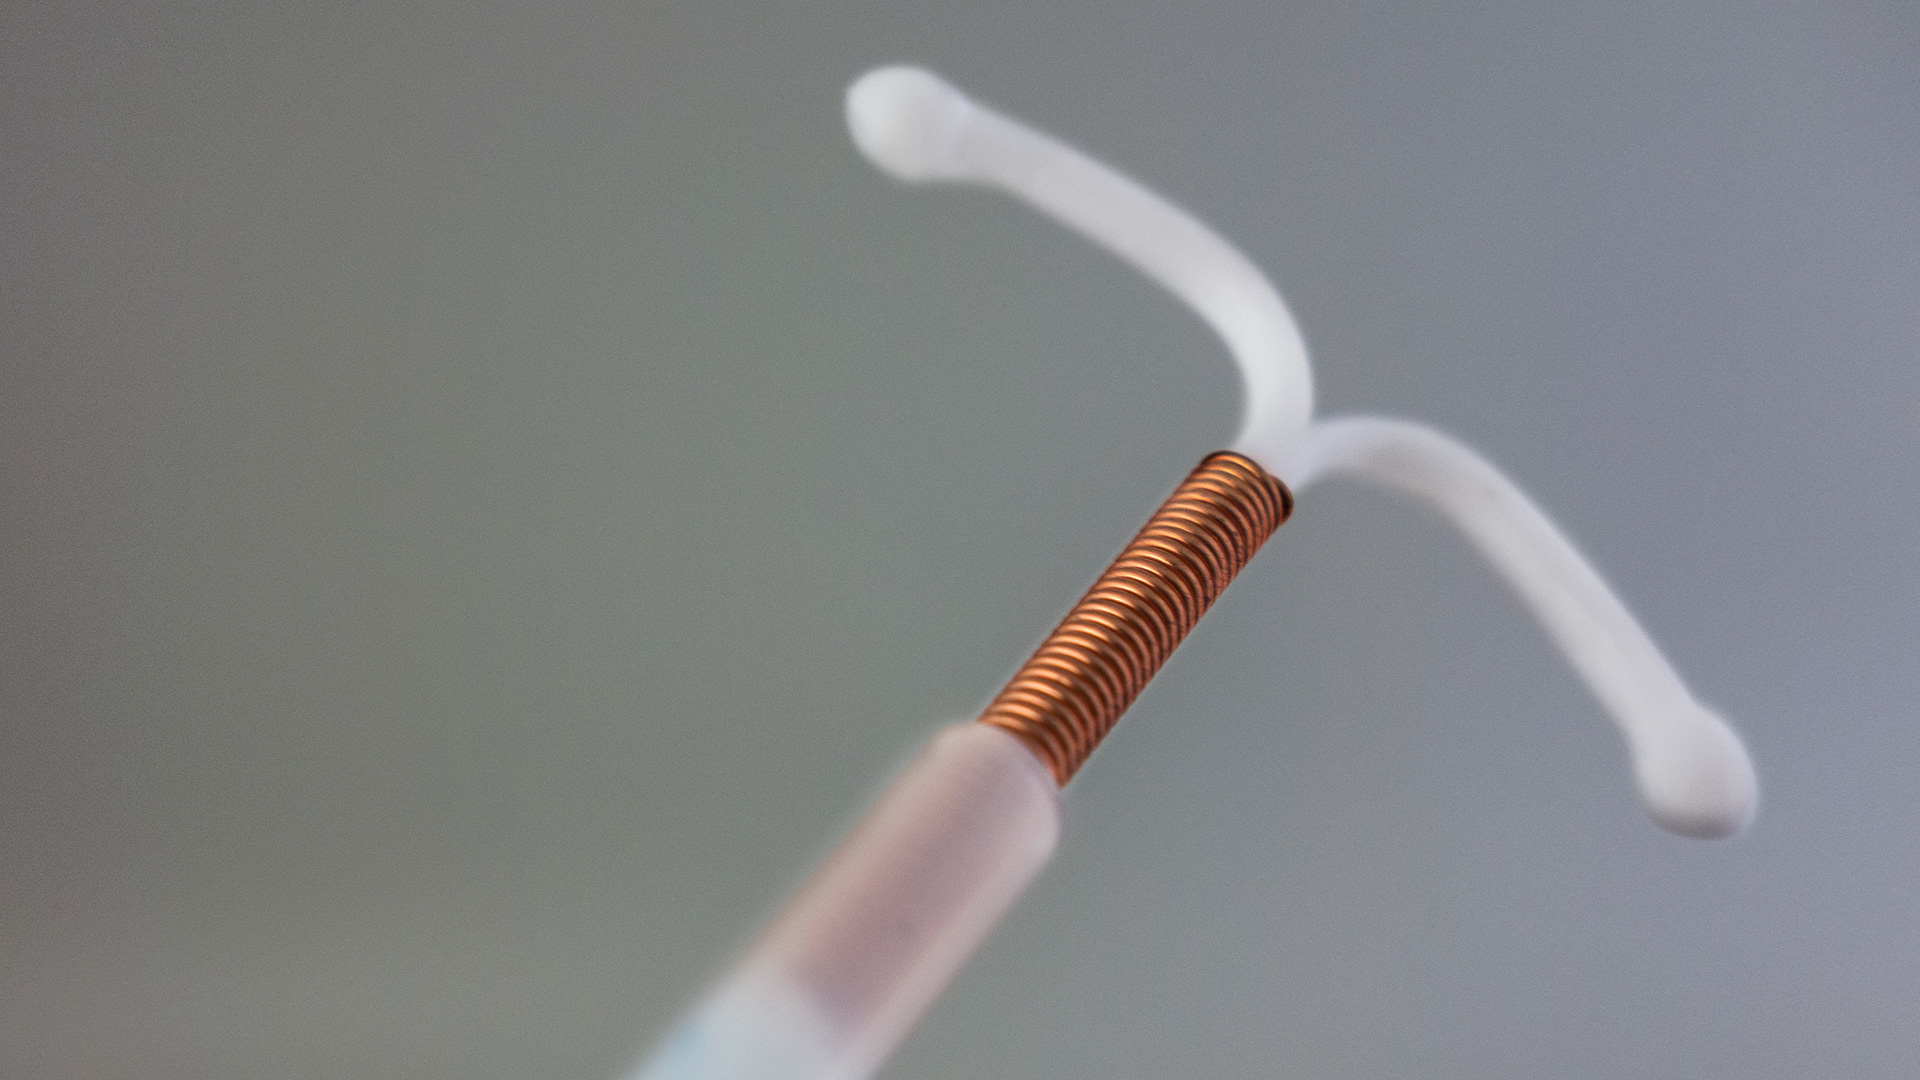 LARC, like the Intrauterine Device (IUD), is efficient and growing in popularity among women searching for alternatives to a daily pill.  As more women seek alternatives to the pill or patch, we asked a medical expert, Marcos Sosa, MD, OB/GYN at Atrium Health, to shine some light on the increasingly popular birth control methods.